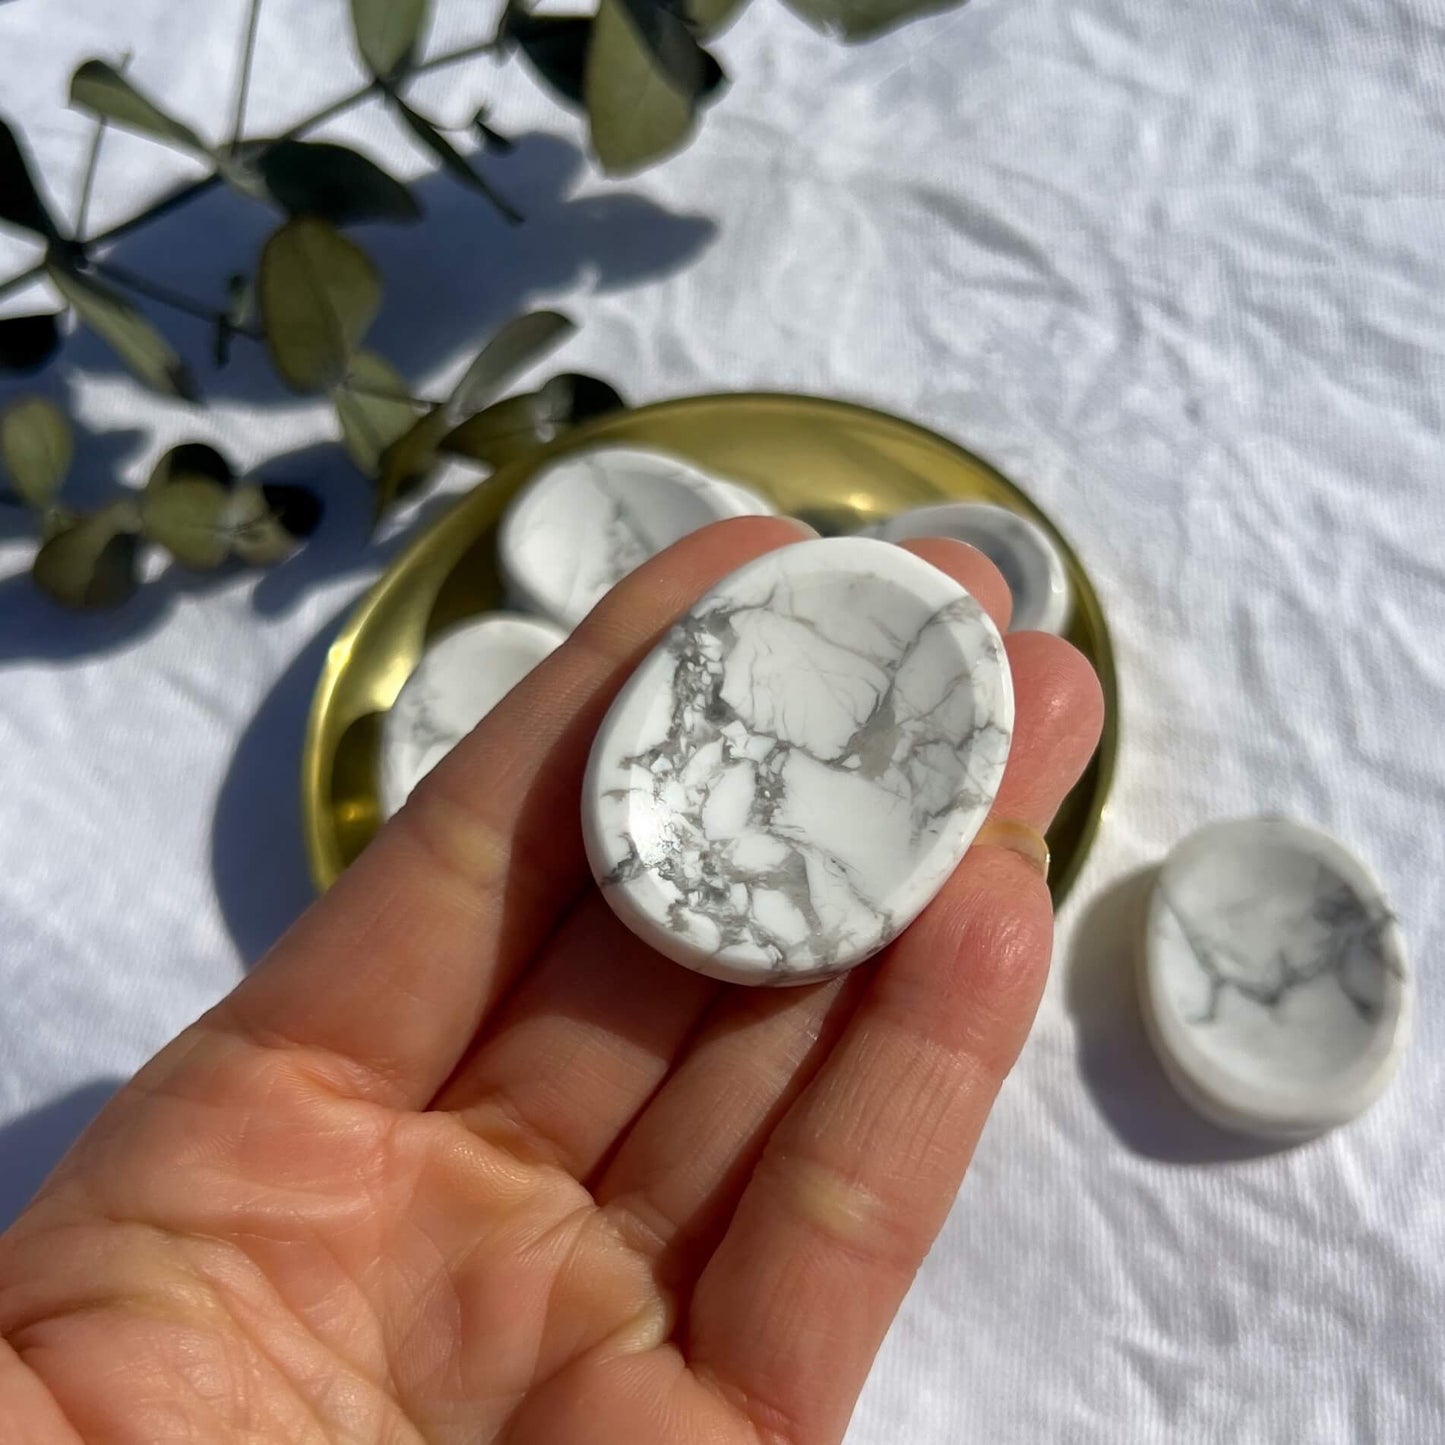 White and grey marbled howlite crystal worrystone held in an open hand